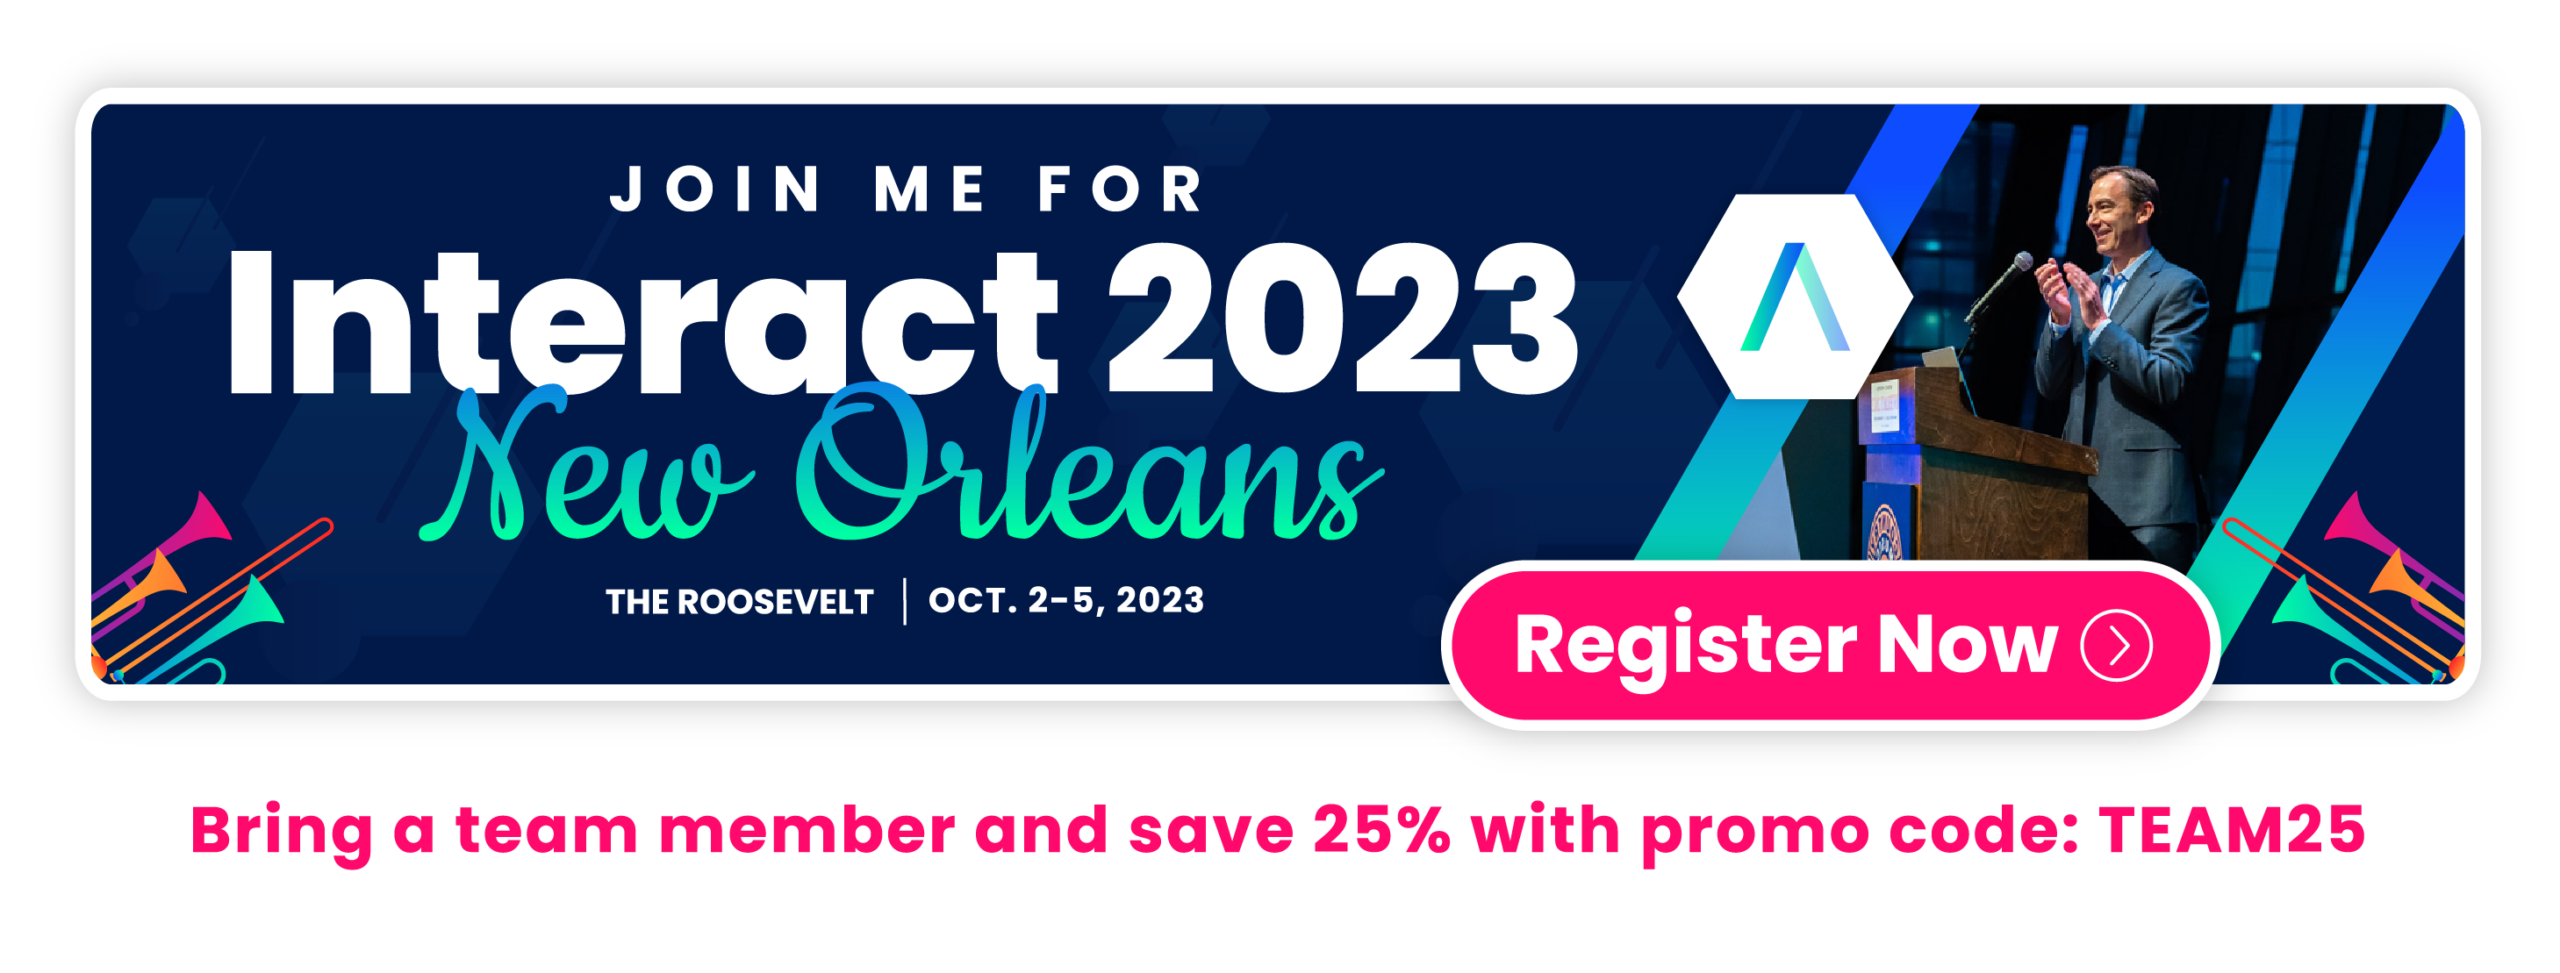 Register today for Mitratech's Interact 2023.